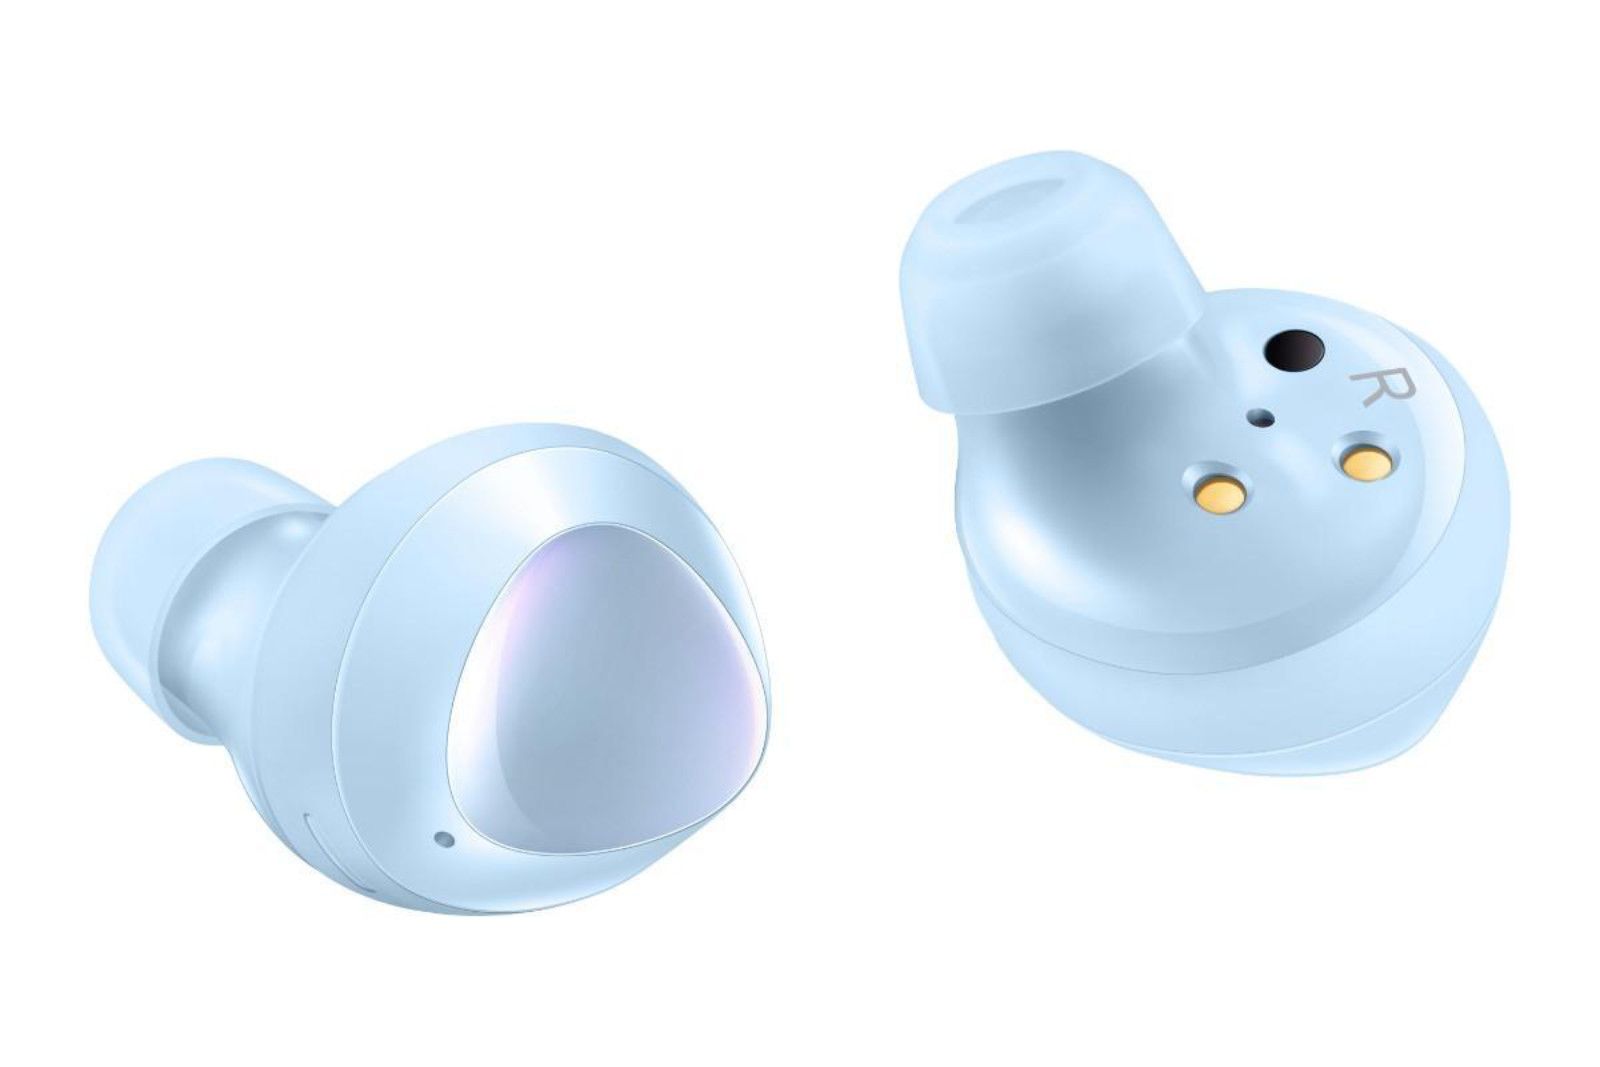 Samsung Galaxy Buds Bring Better Battery Life image 1